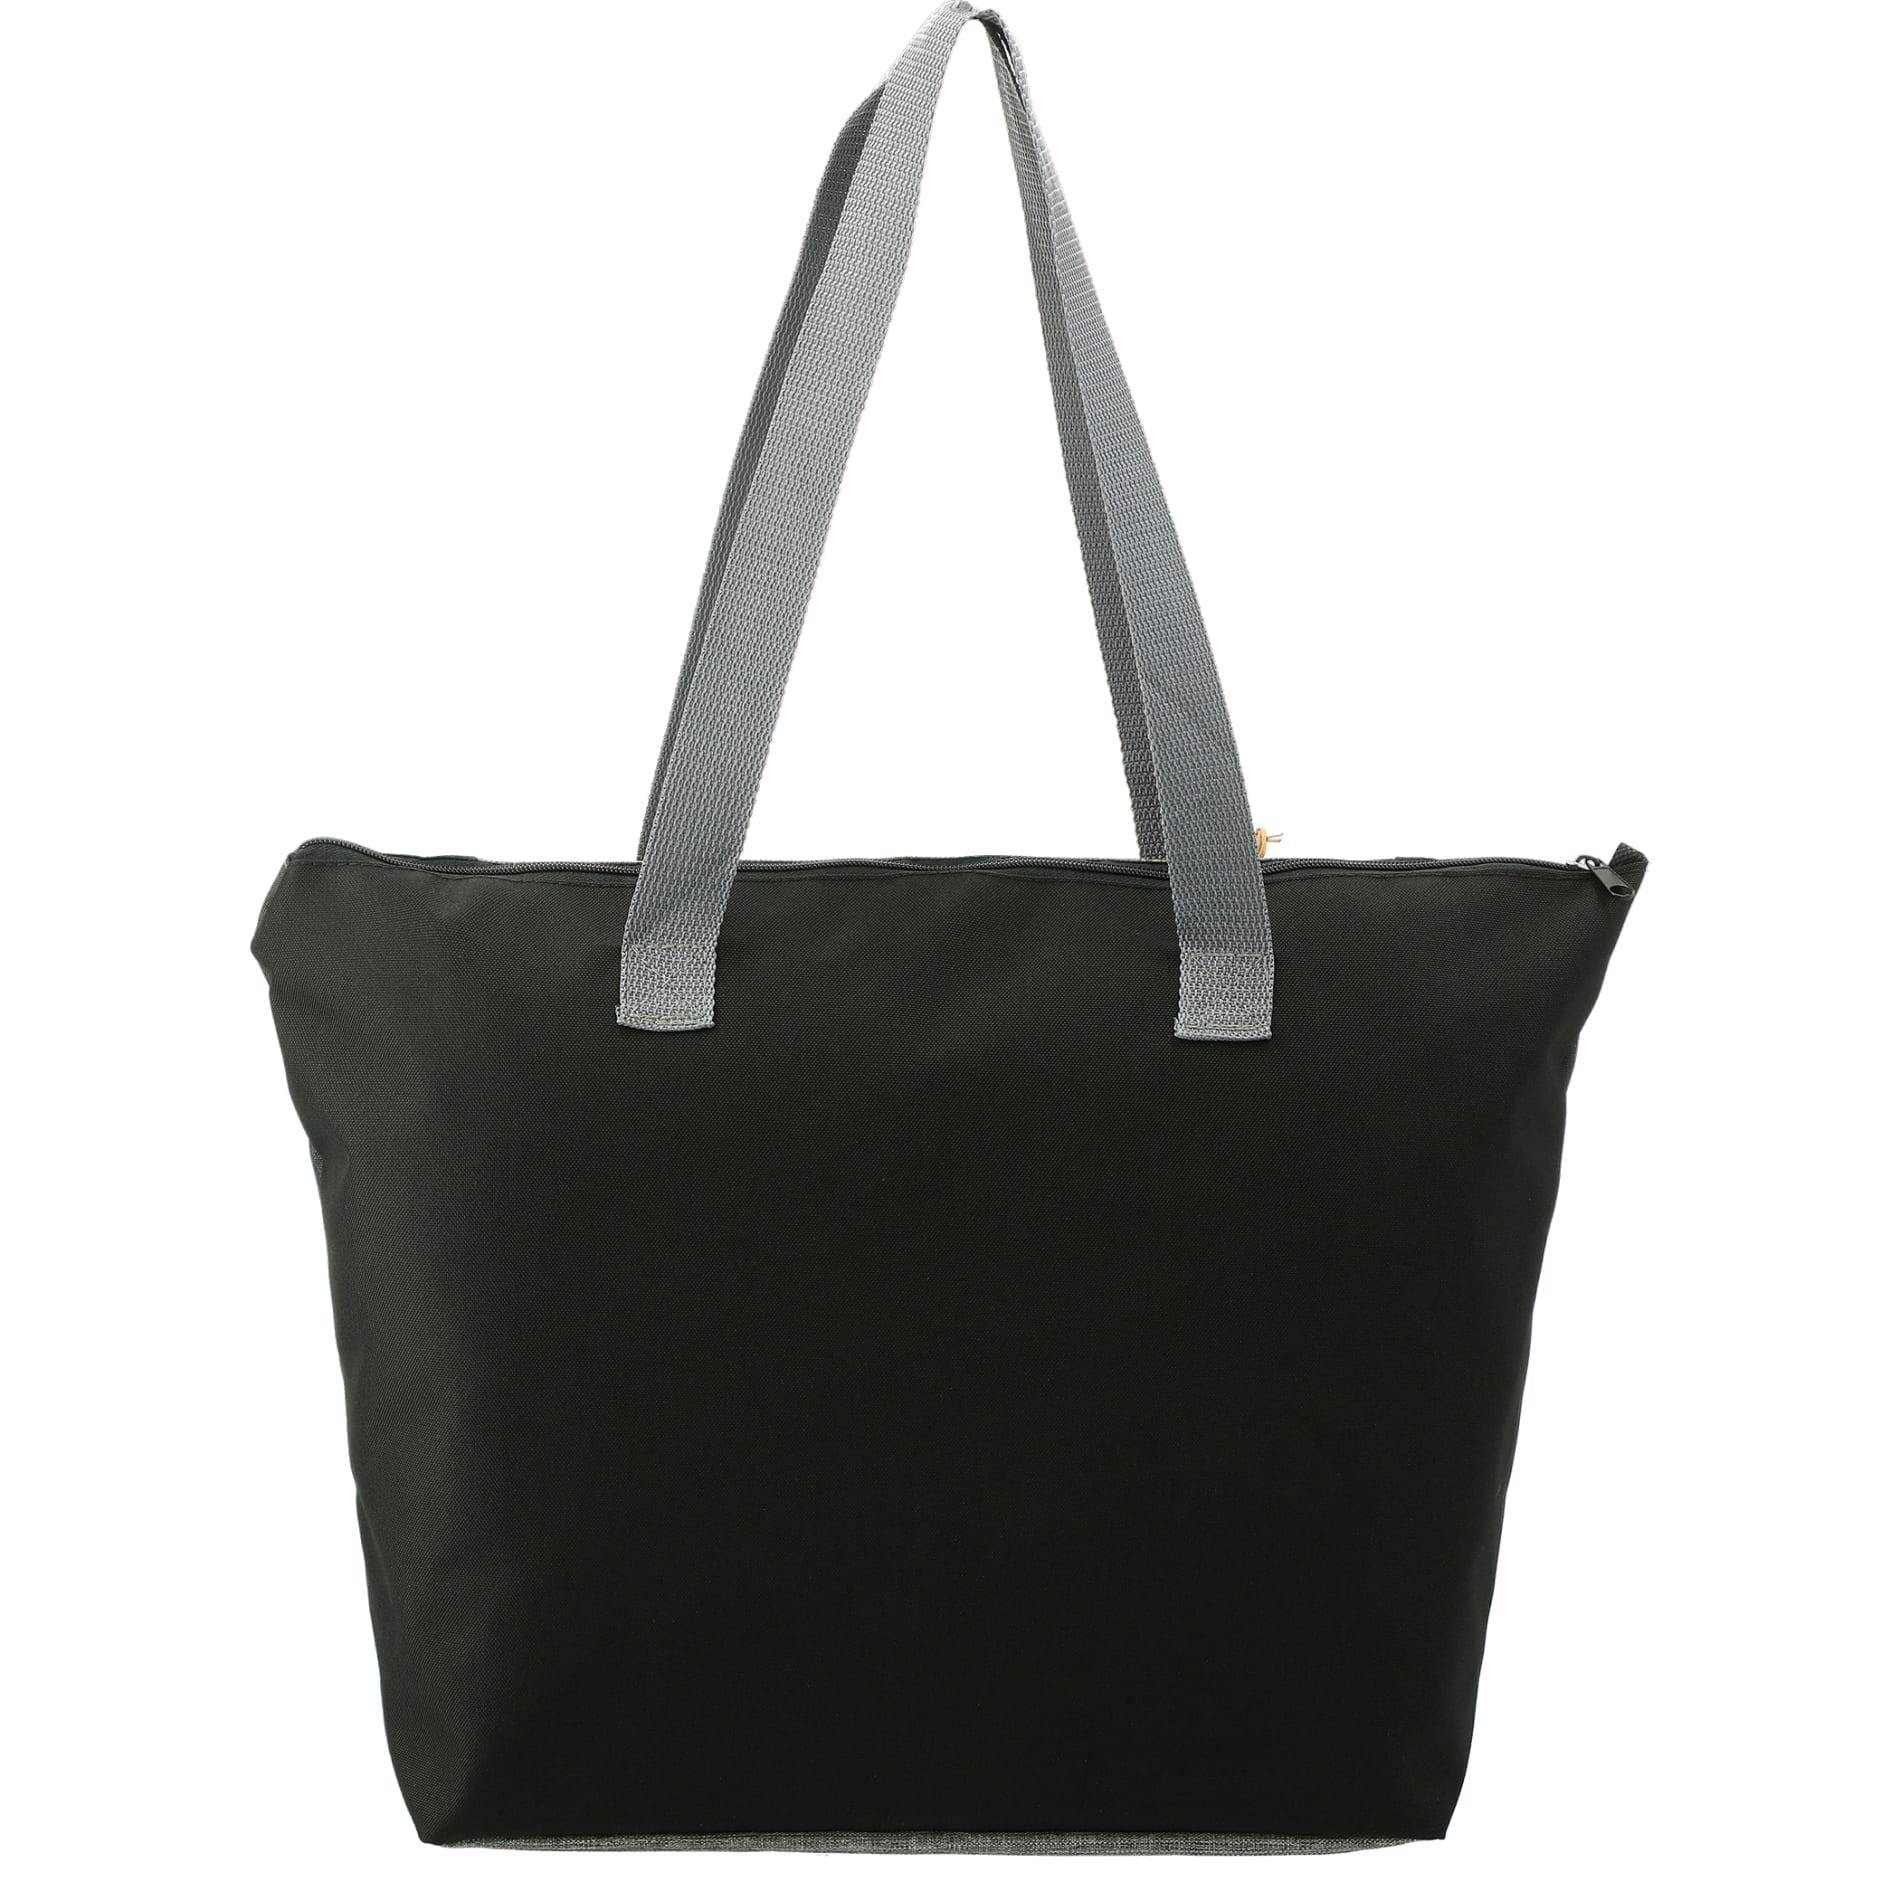 Reclaim Recycled Zippered Tote - additional Image 2